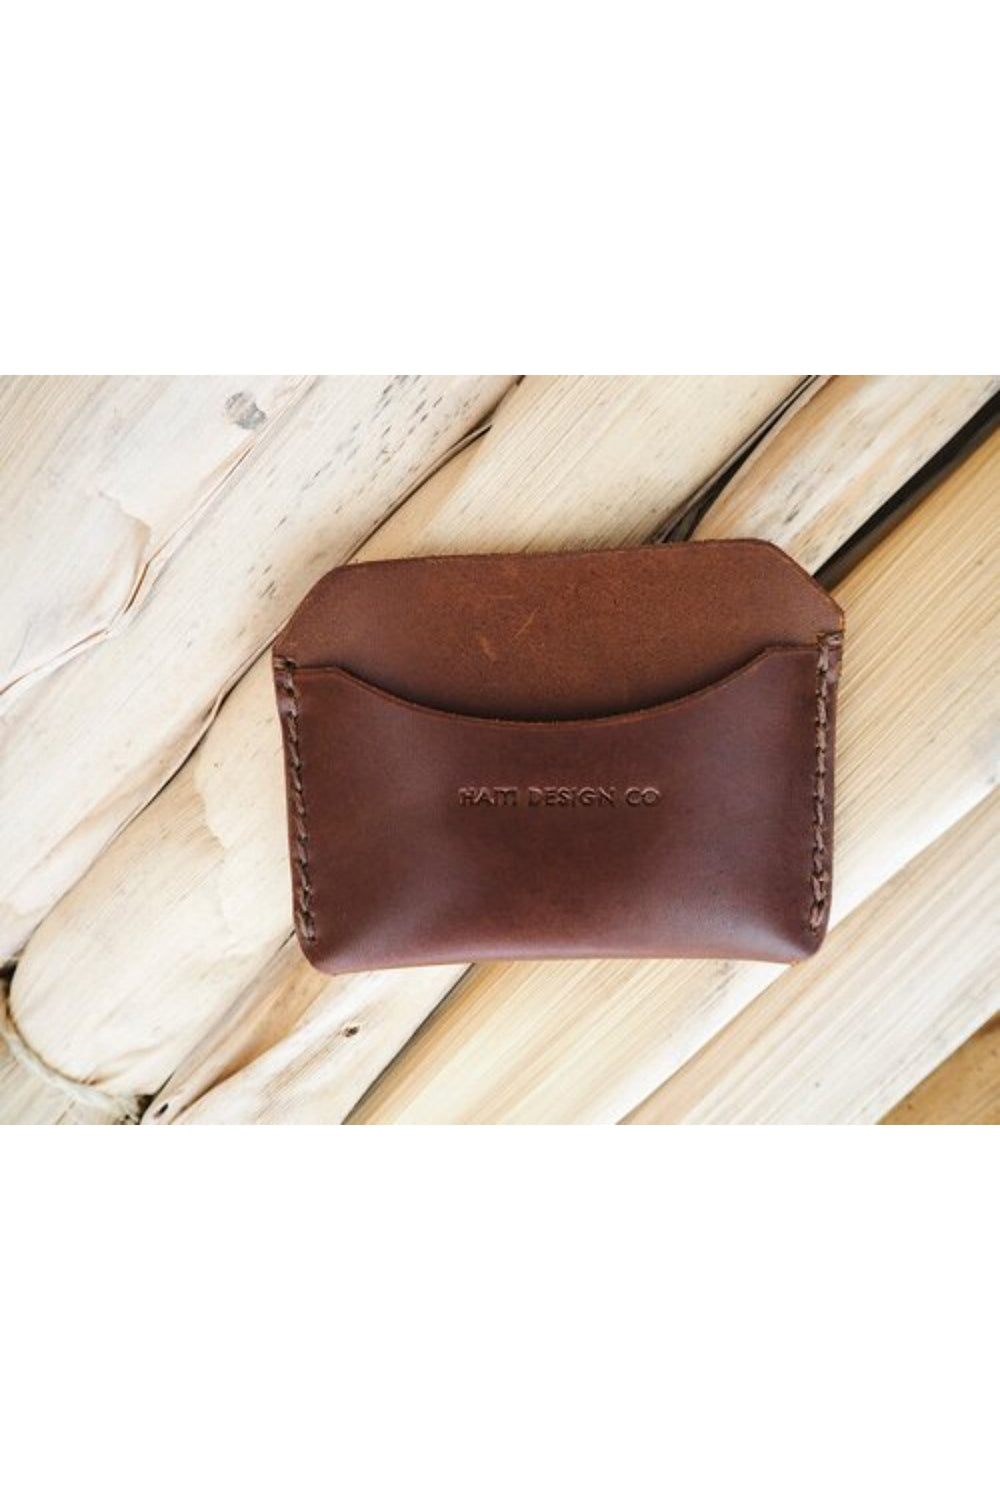 Slim Leather Cardholder by 2nd Story Goods